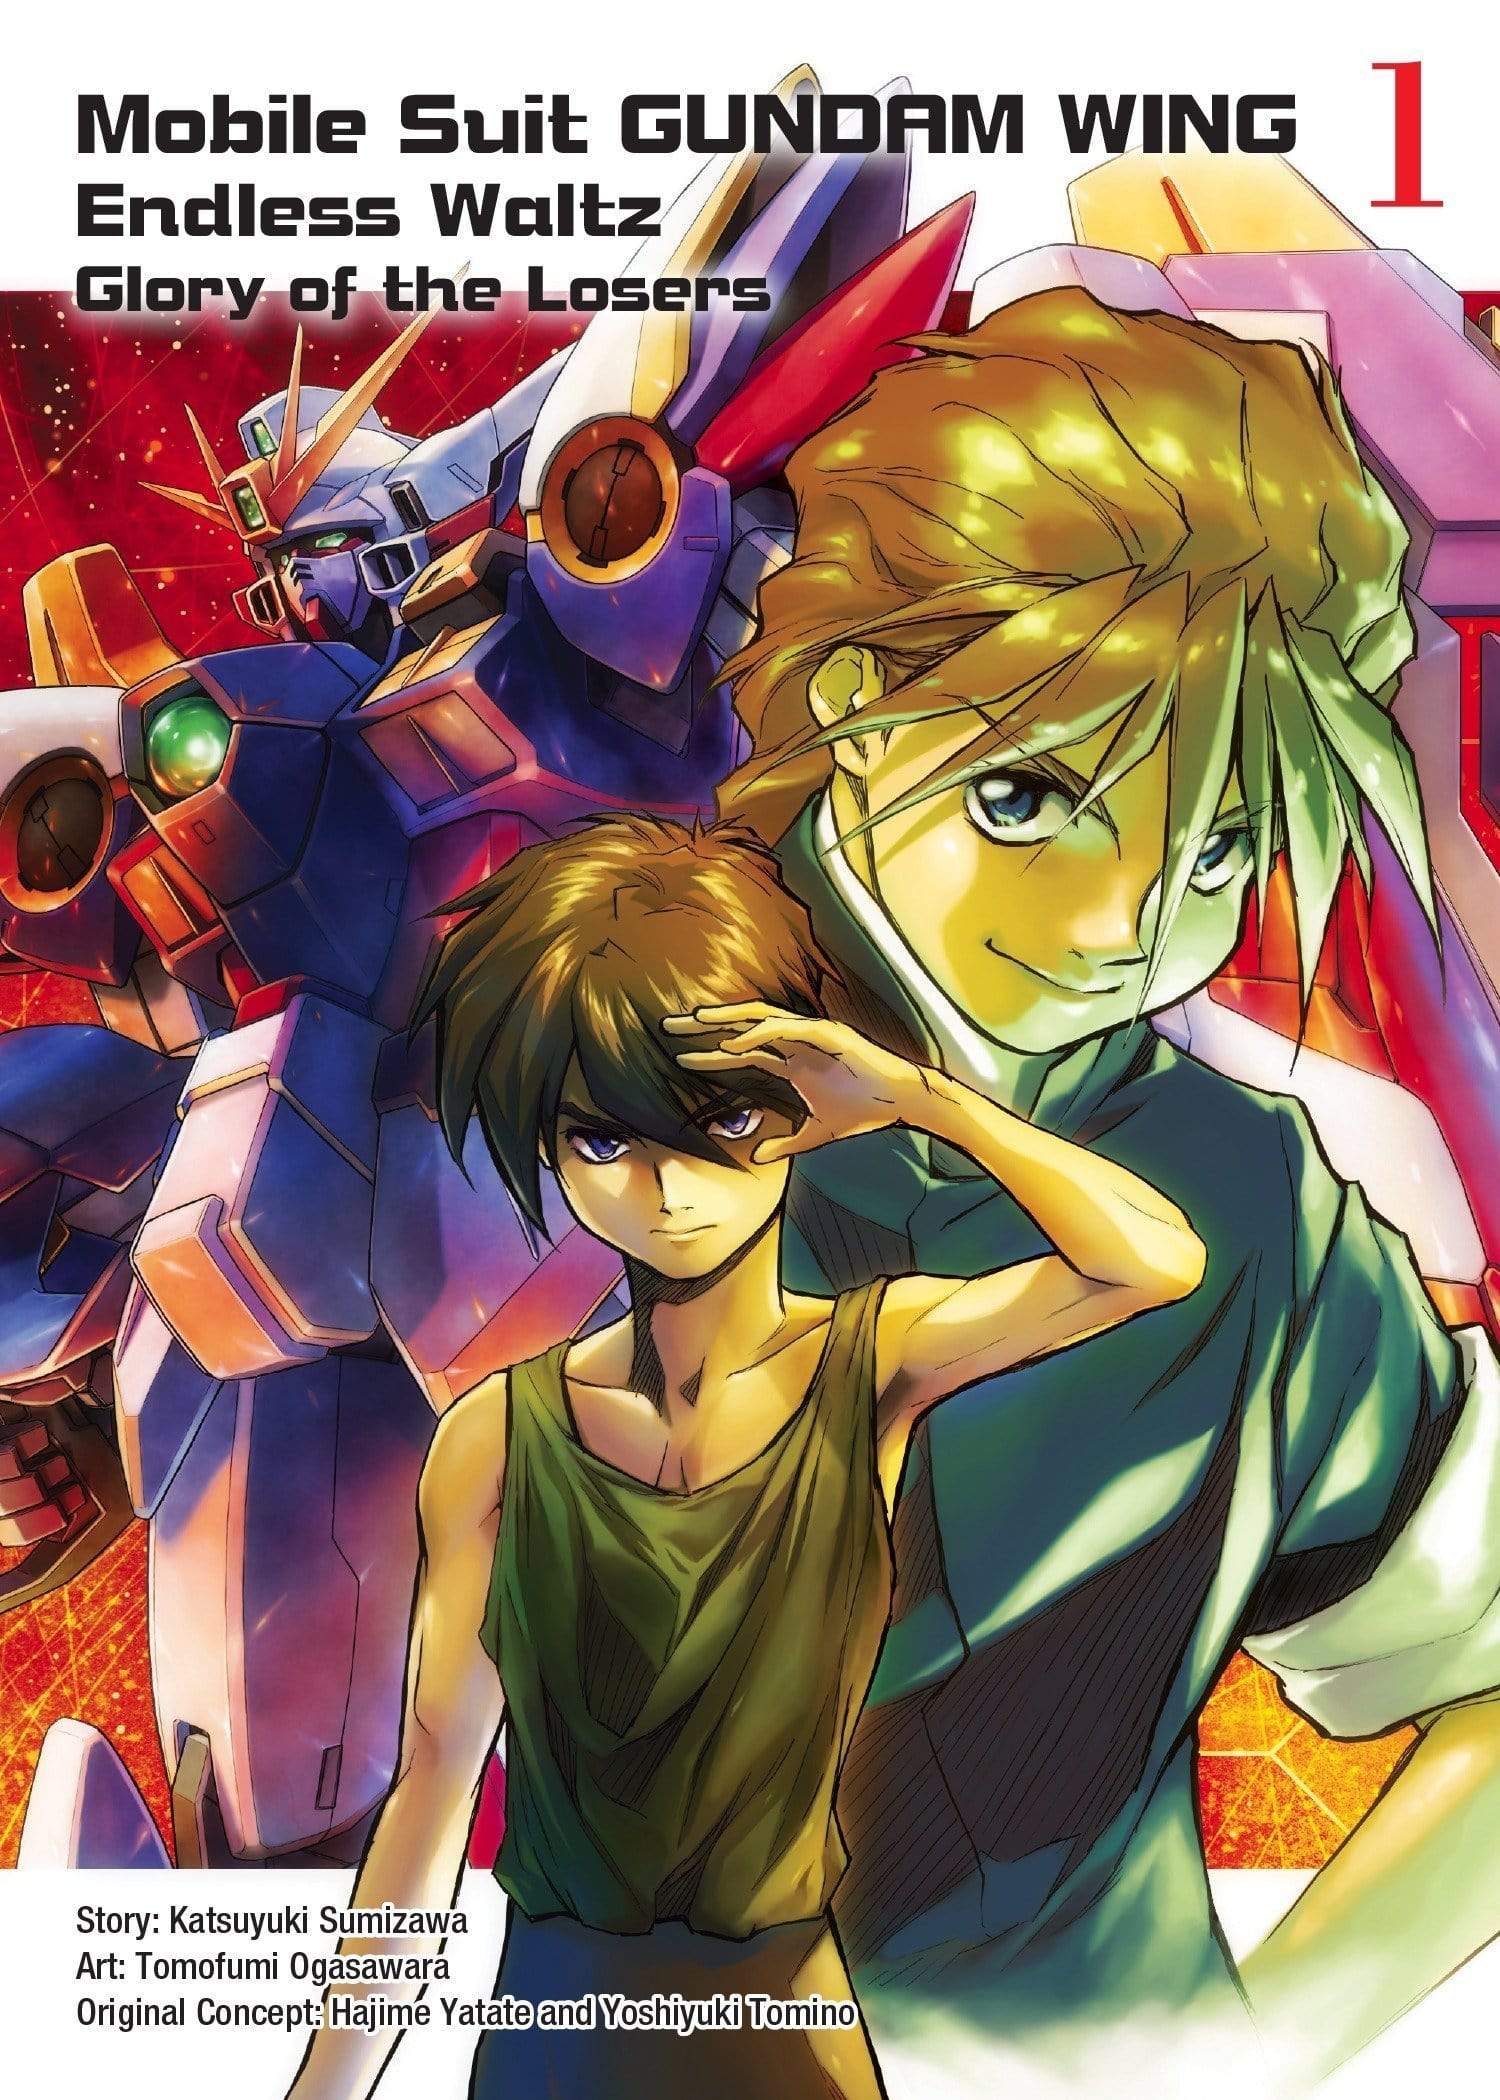 Mobile Suit Gundam WING, 1: Endless Waltz: Glory of the Losers - Saltire Games